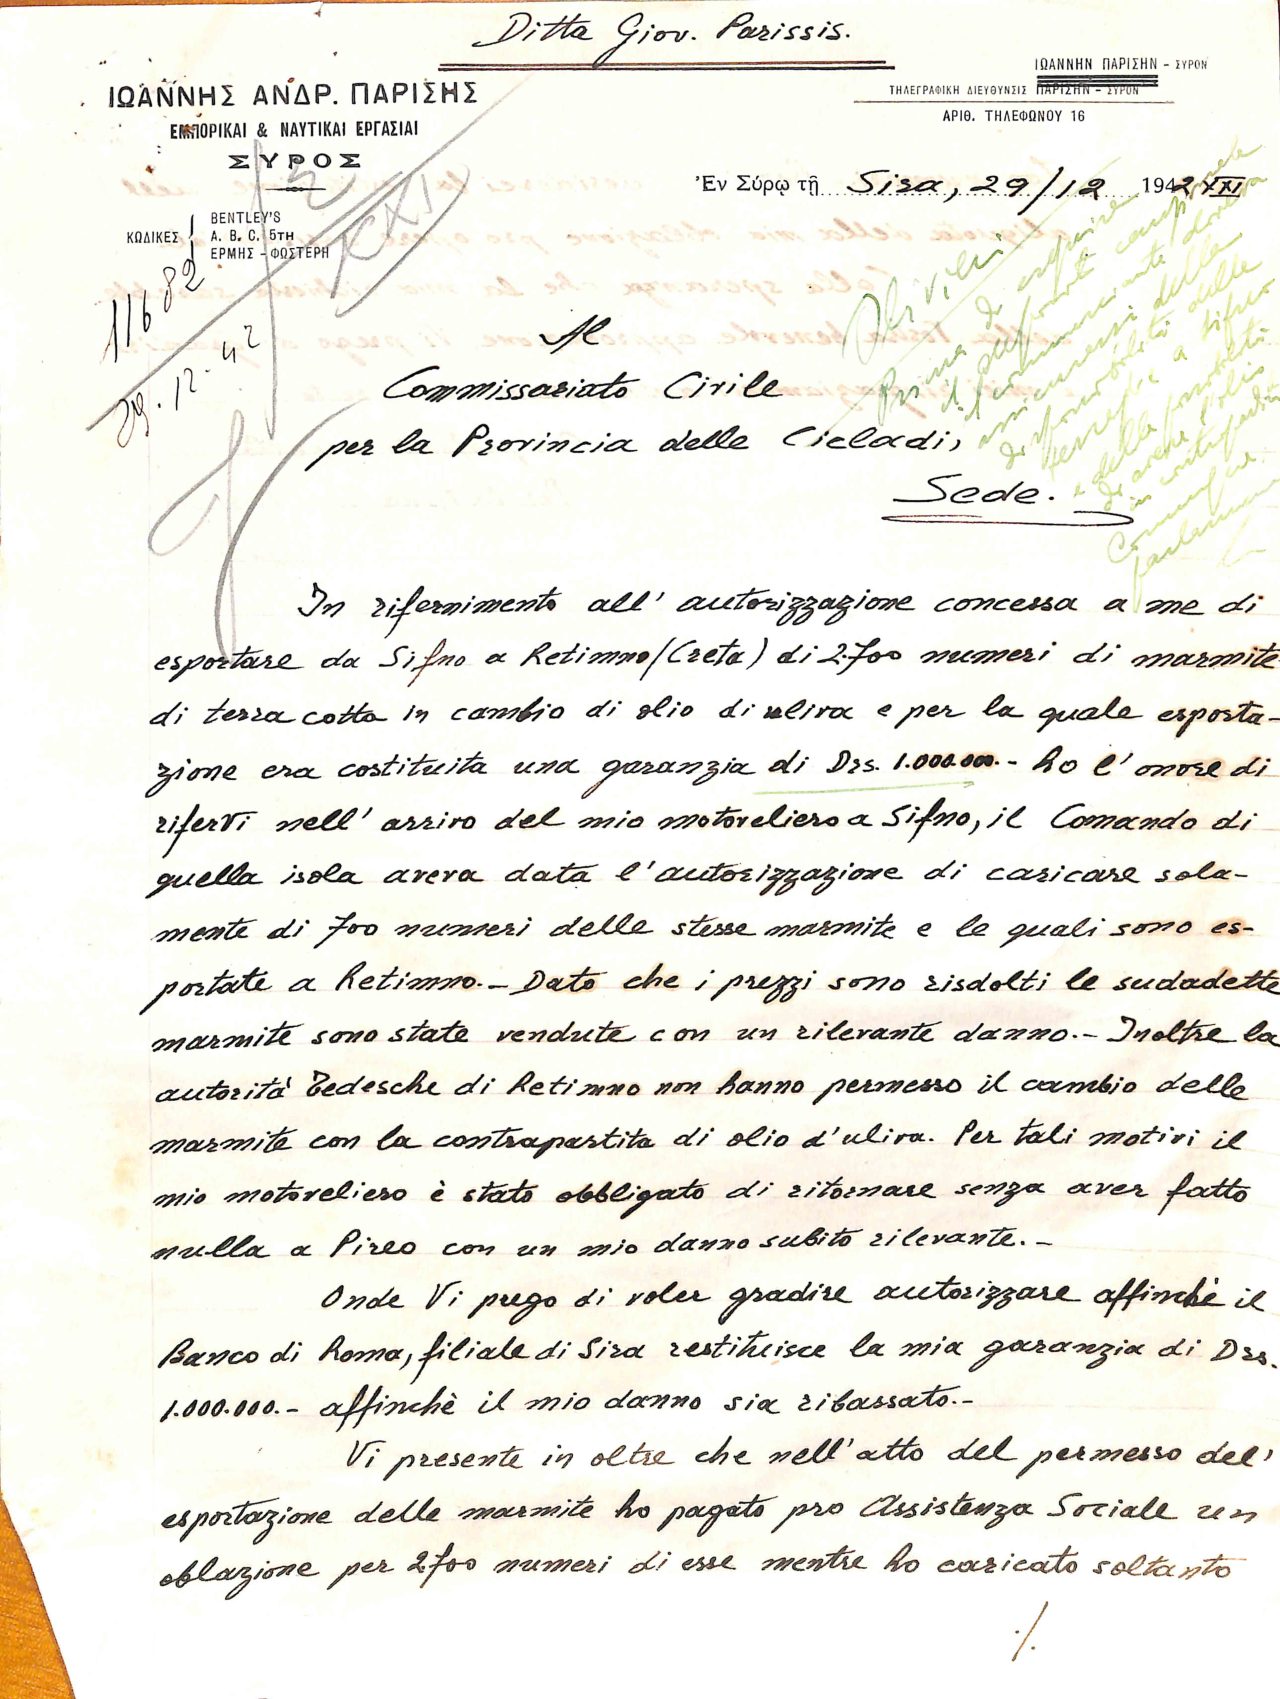 Correspondence between Giannis Parissis and Italian commissioner of the Cyclades, December 29, 1942 (1/2).